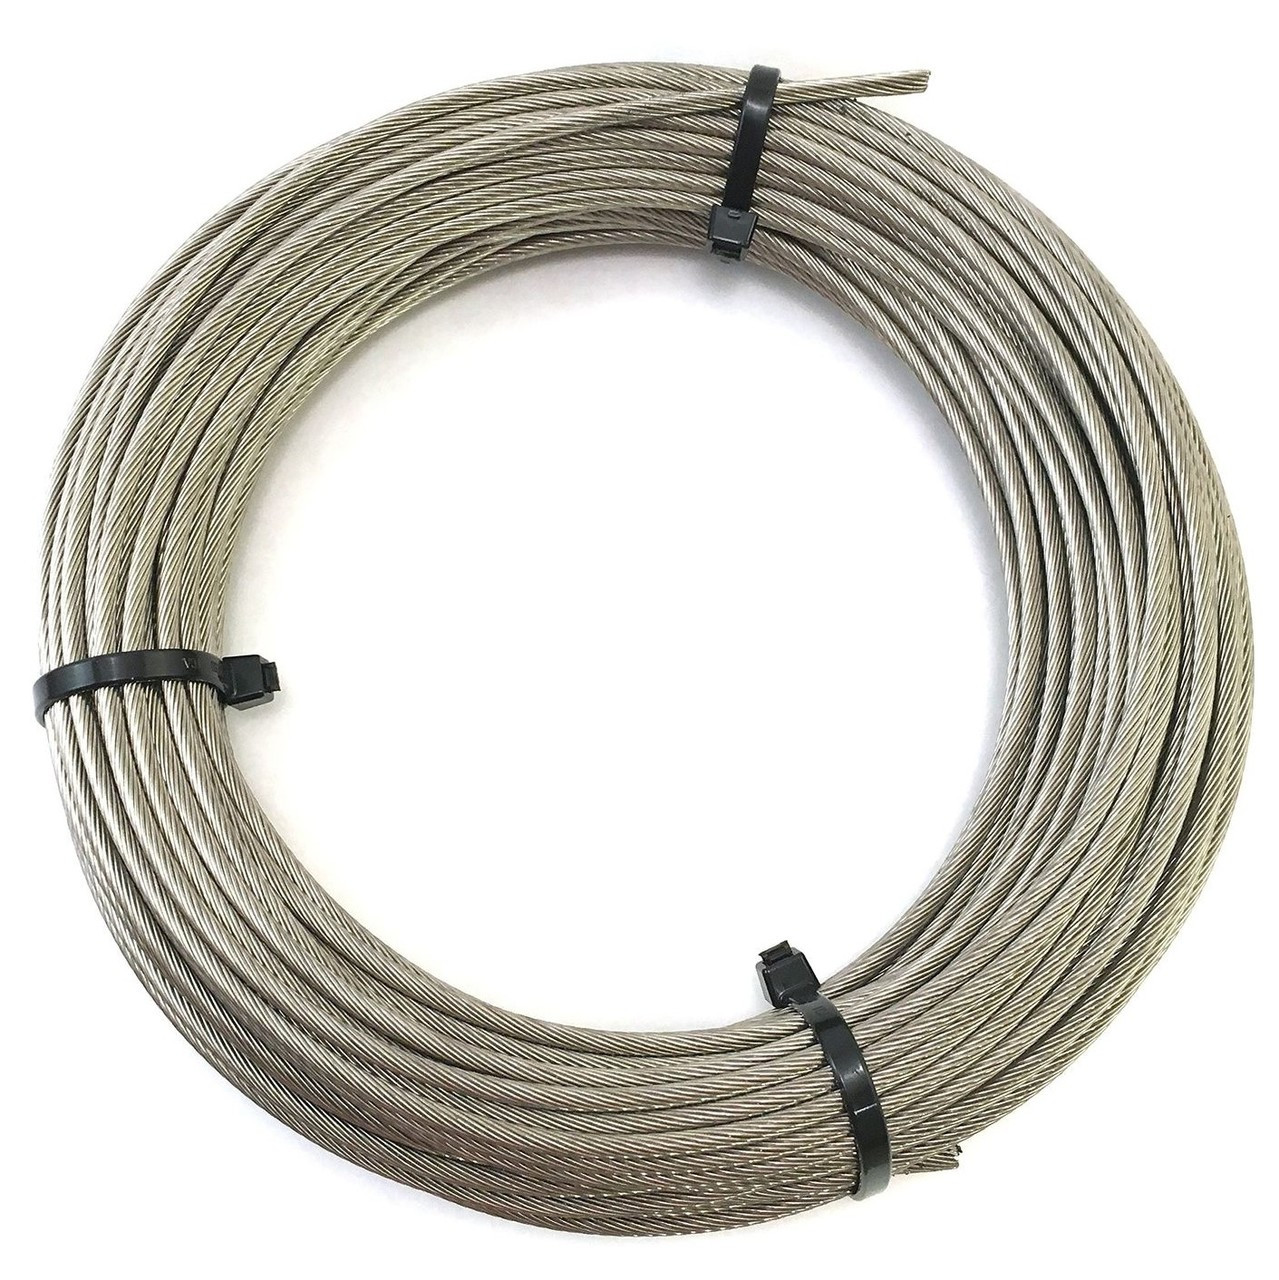 High Brightness Stainless Steel 316 Wire Rope Cable 3/16 7x19 by 50' Marine  Grade - US Stainless